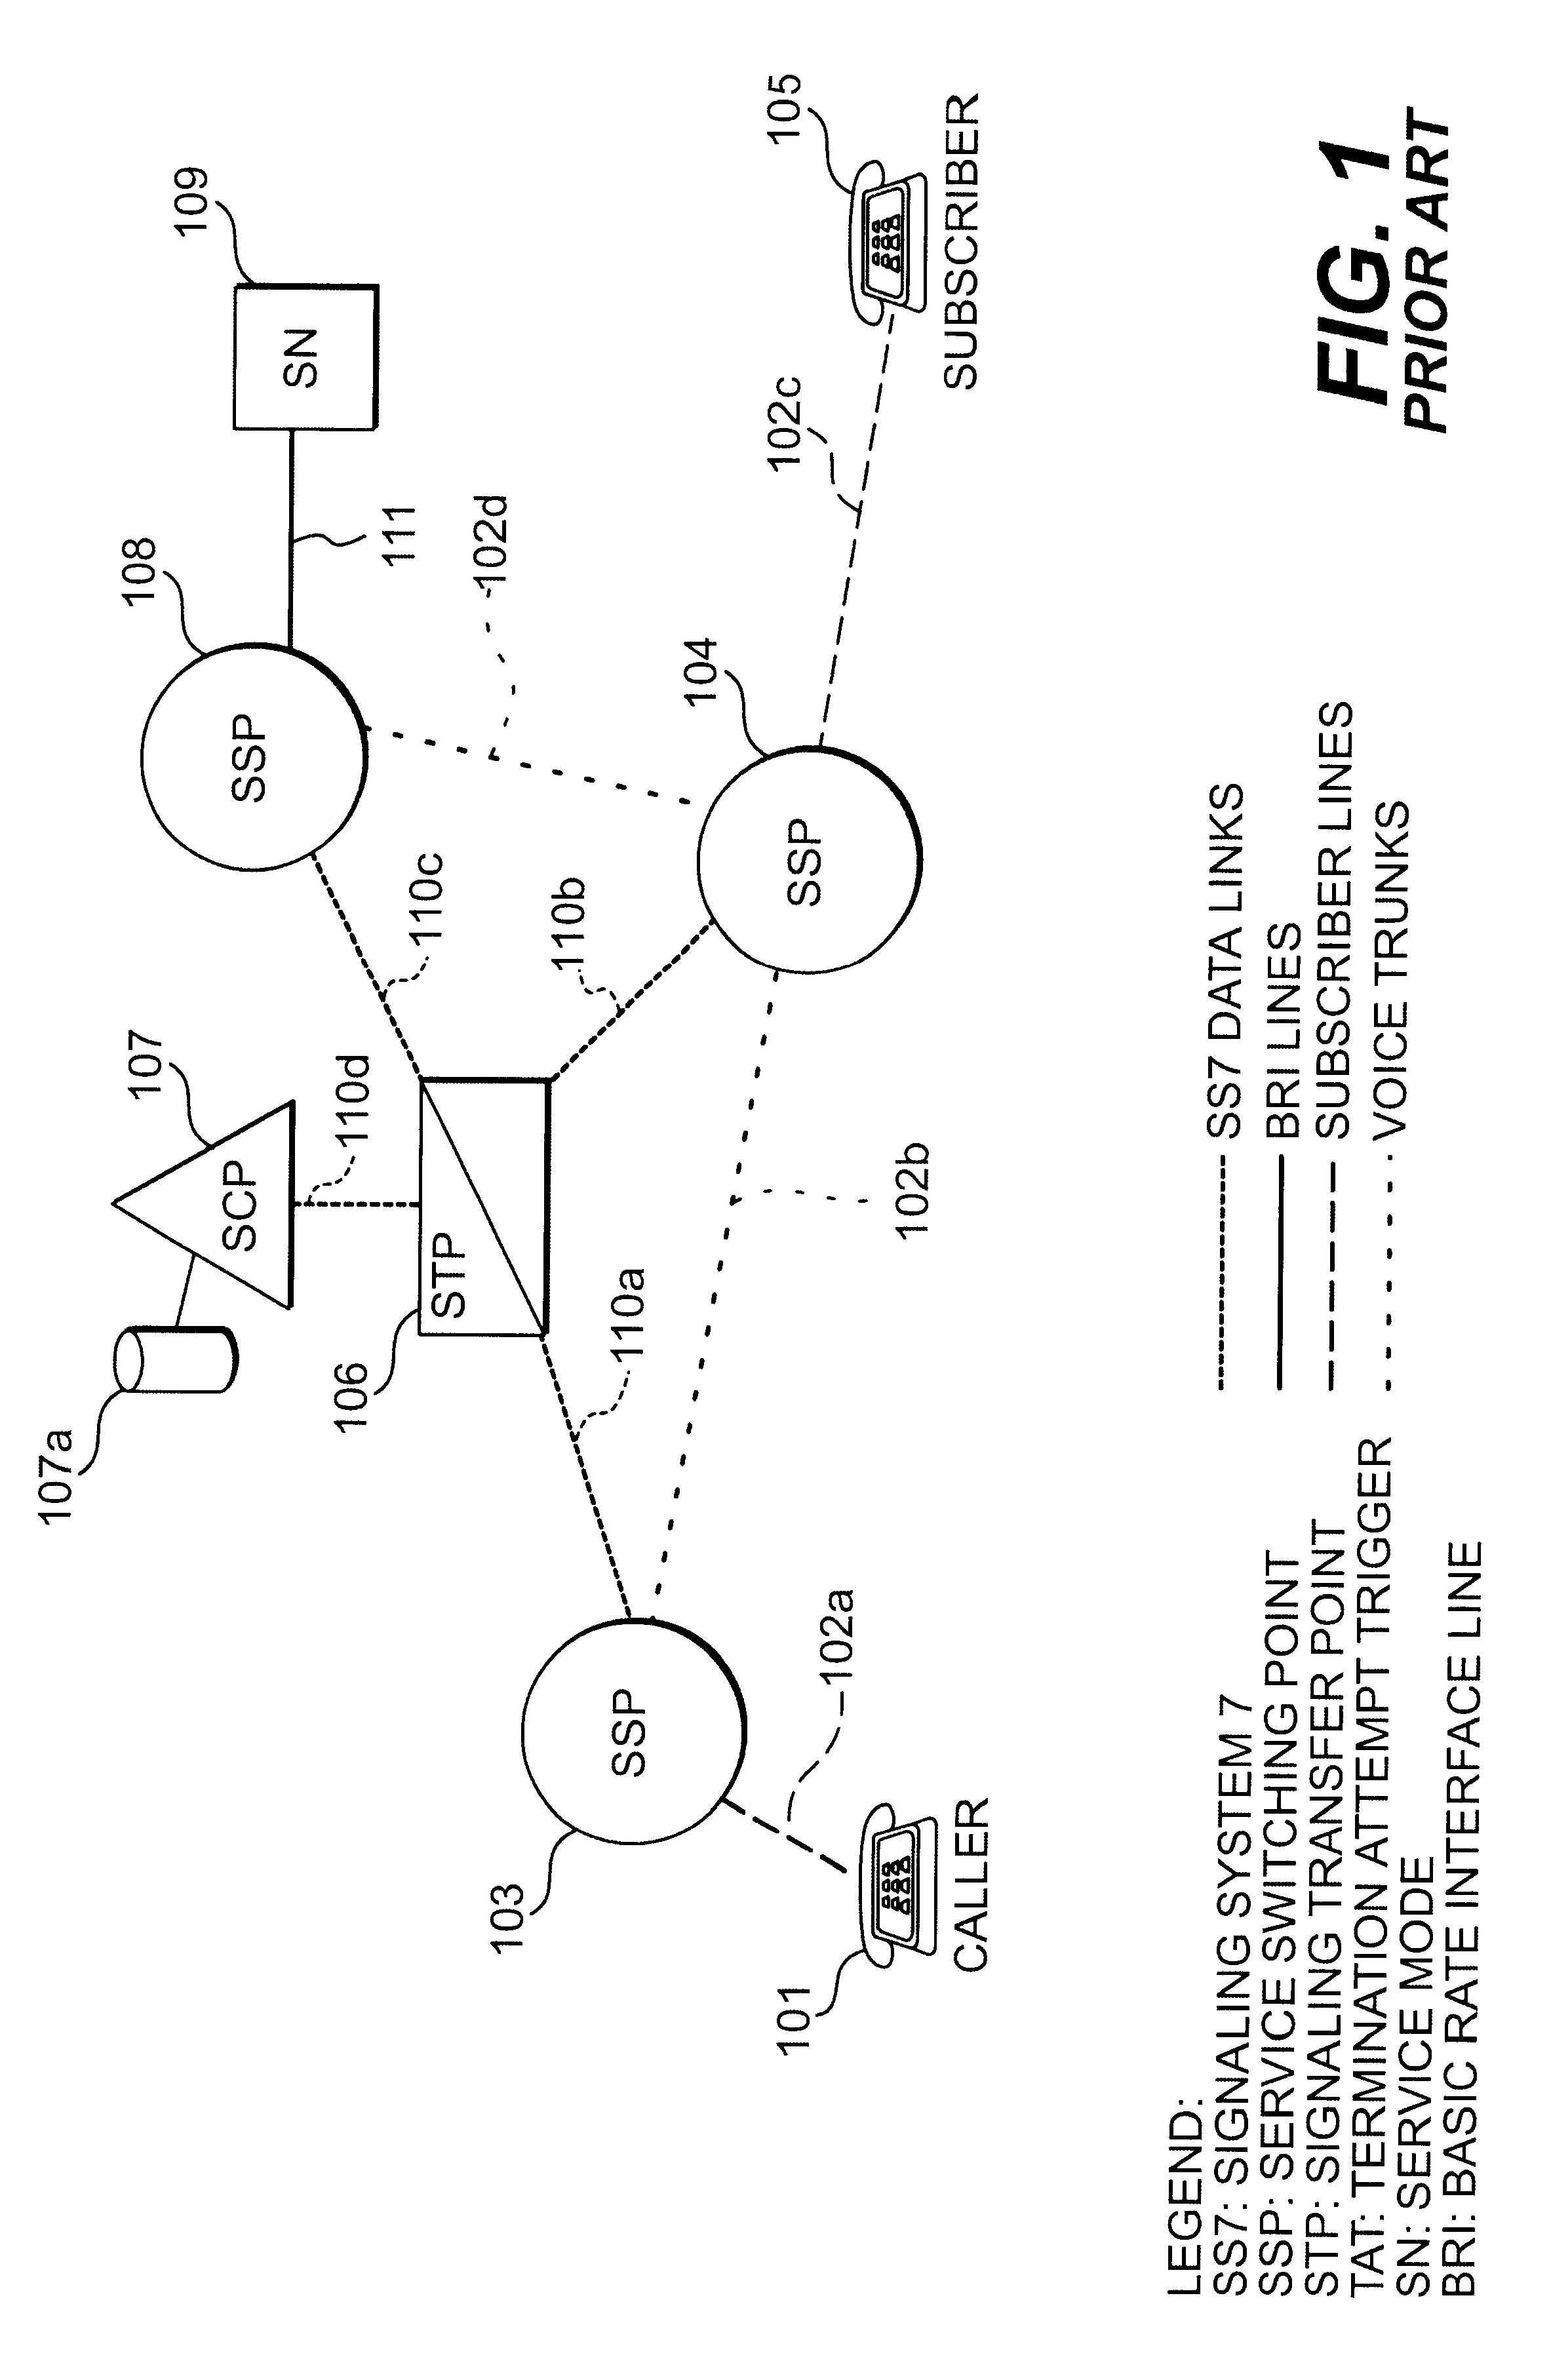 System and method for completing private or unknown calls made to subscribers to a privacy screening service